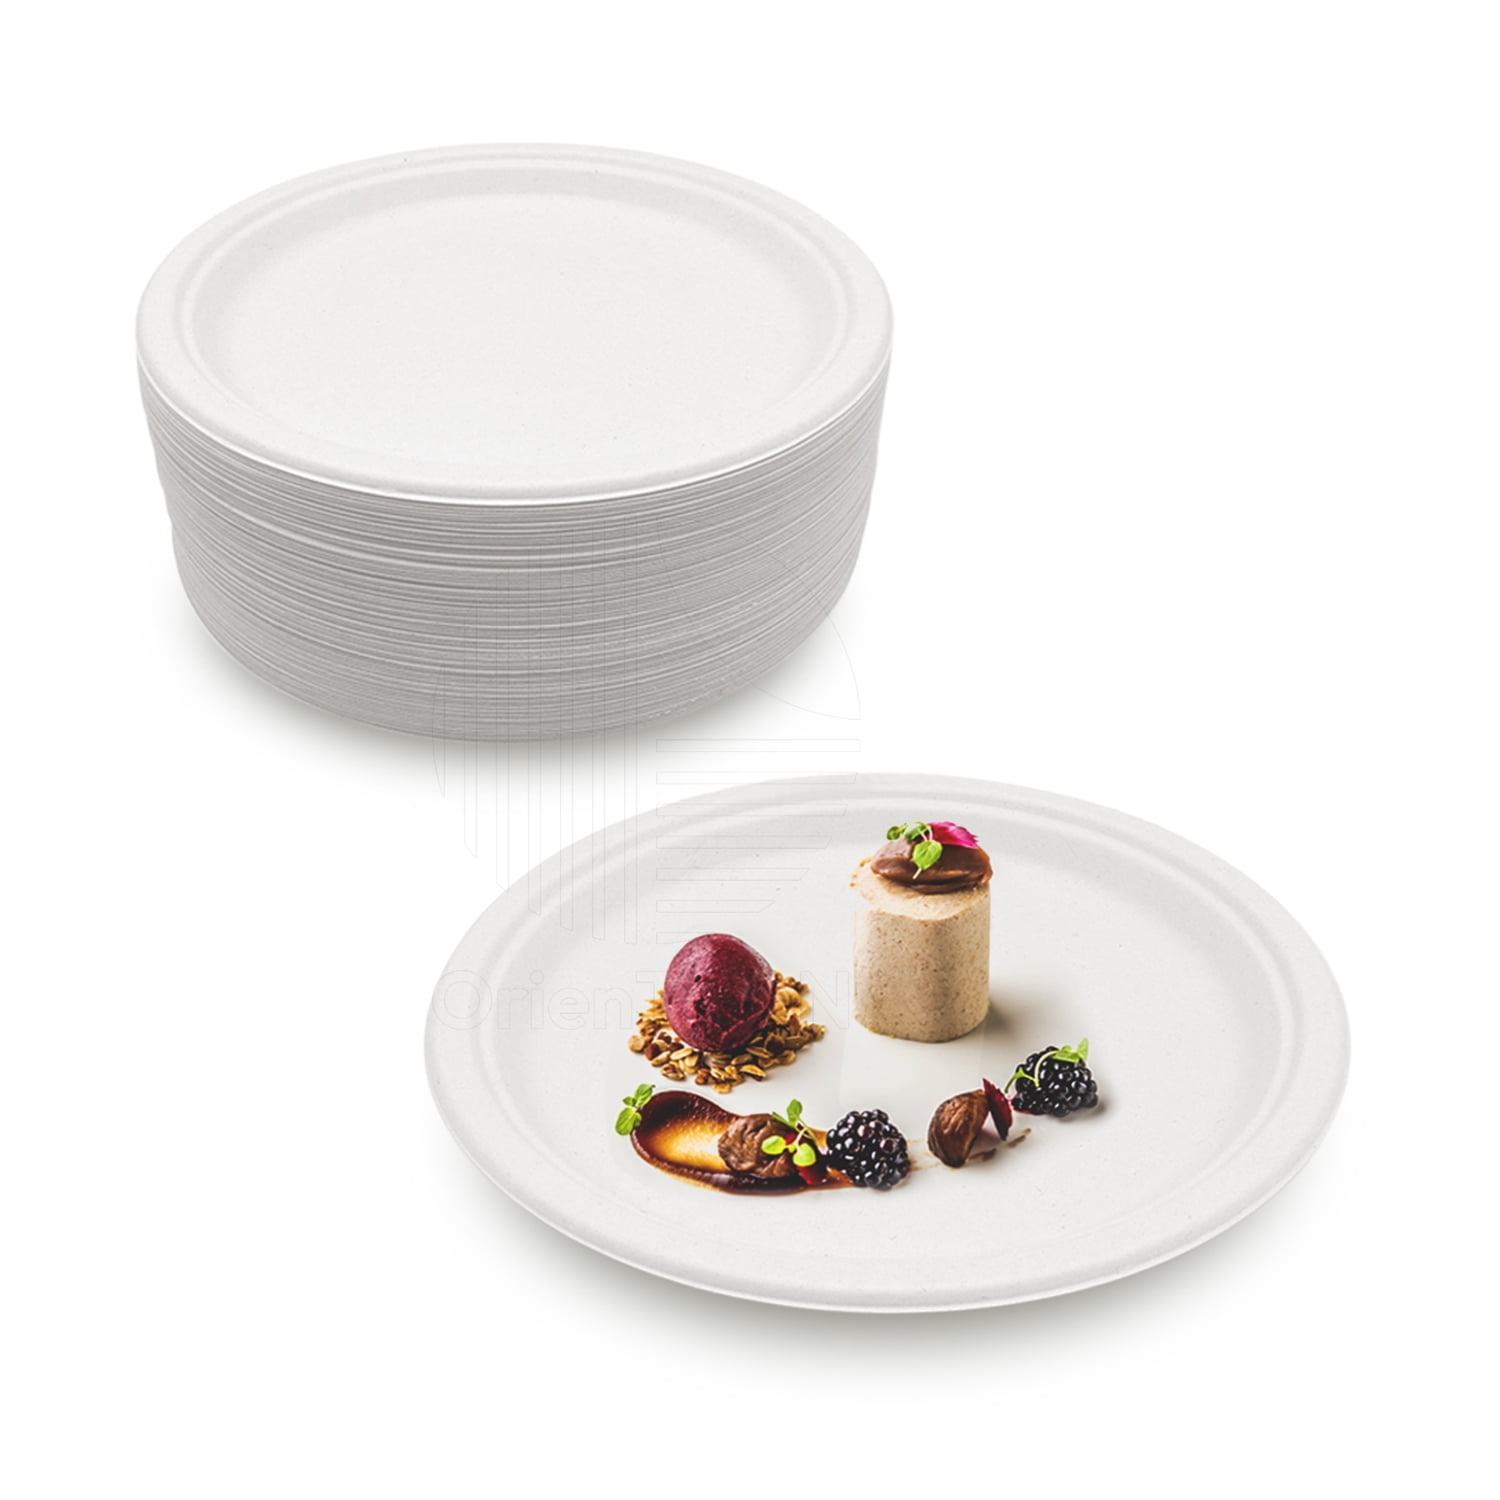 Hygloss Products Paper Plates - Uncoated White Plate - Use for Foodware,  Events, Activities, Crafts Projects and More - Environmentally Friendly 